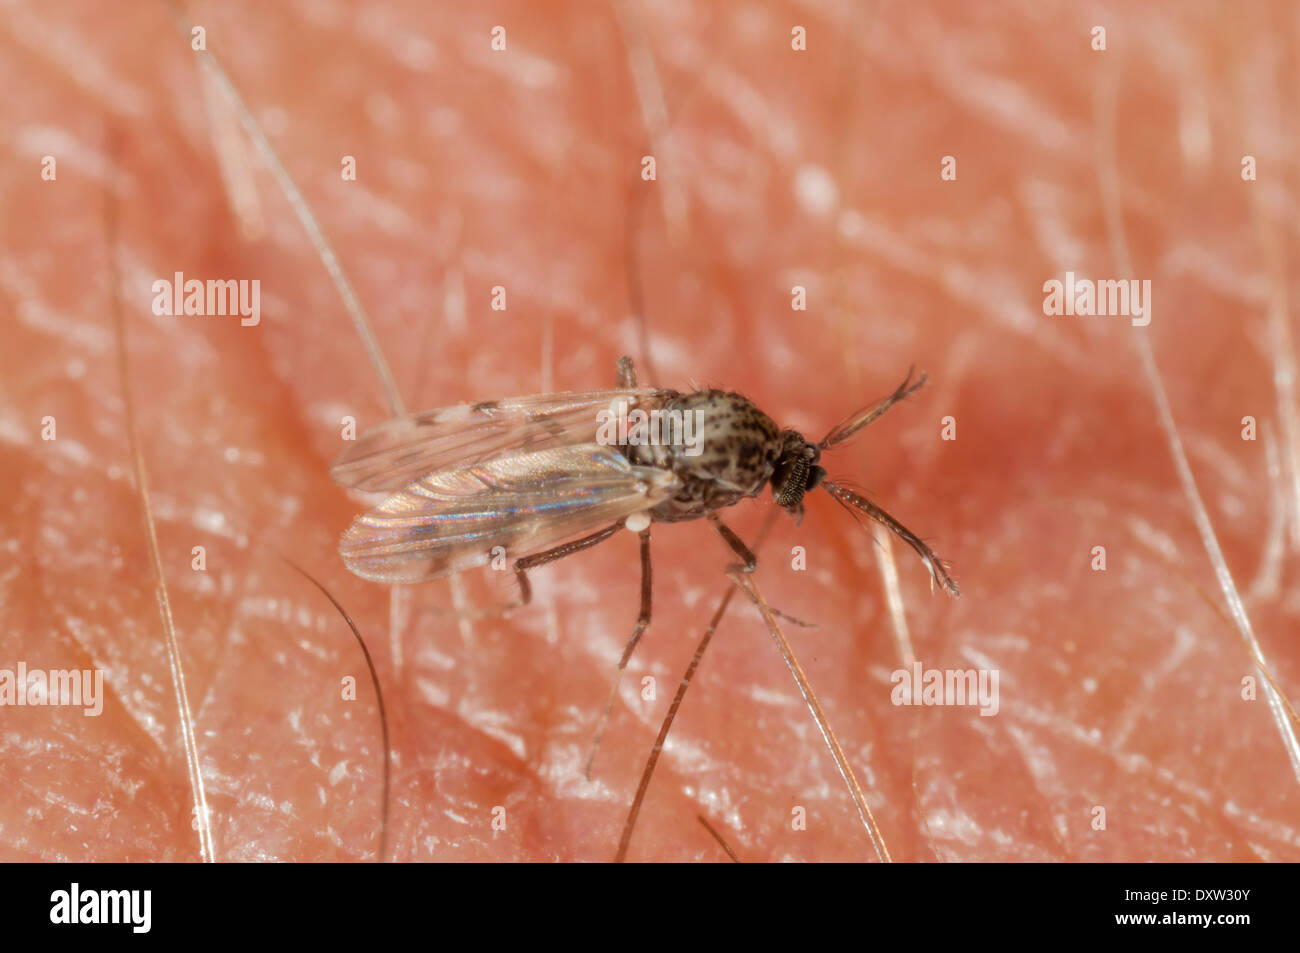 One of the Midges responsible for the transmission of zoonotic diseases to the cattle, such as Blue Tongue or African Horse Sickness. Stock Photo